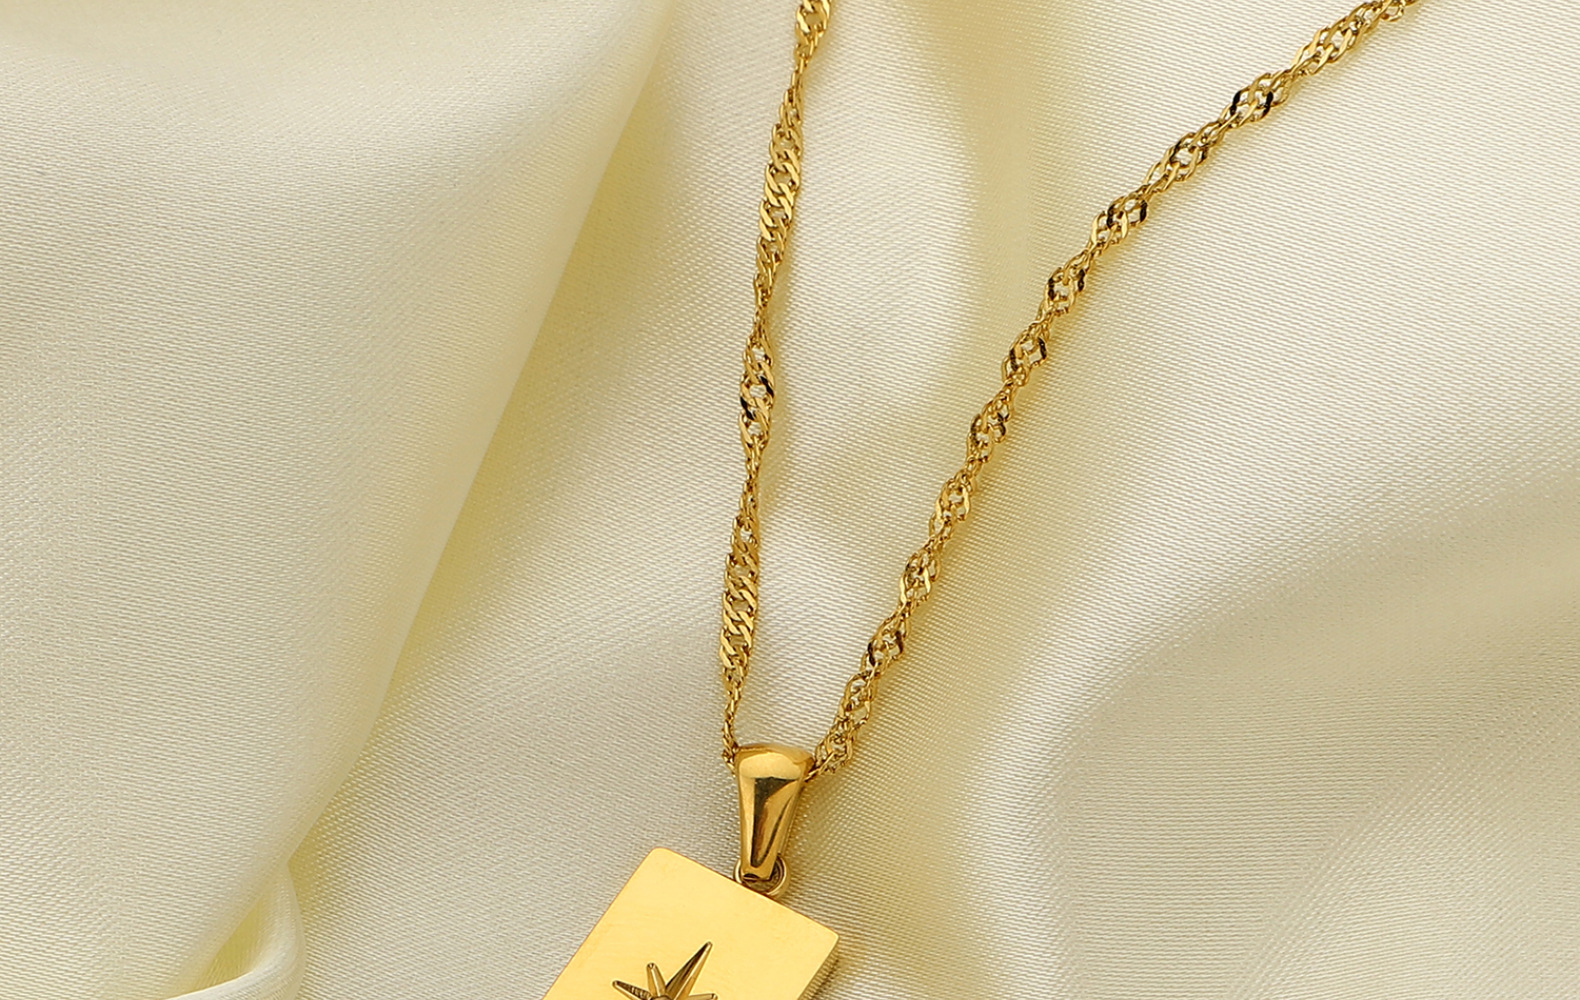 Rectangular Sunlight Pendant 18K Gold Plated Stainless Steel Necklacepicture2